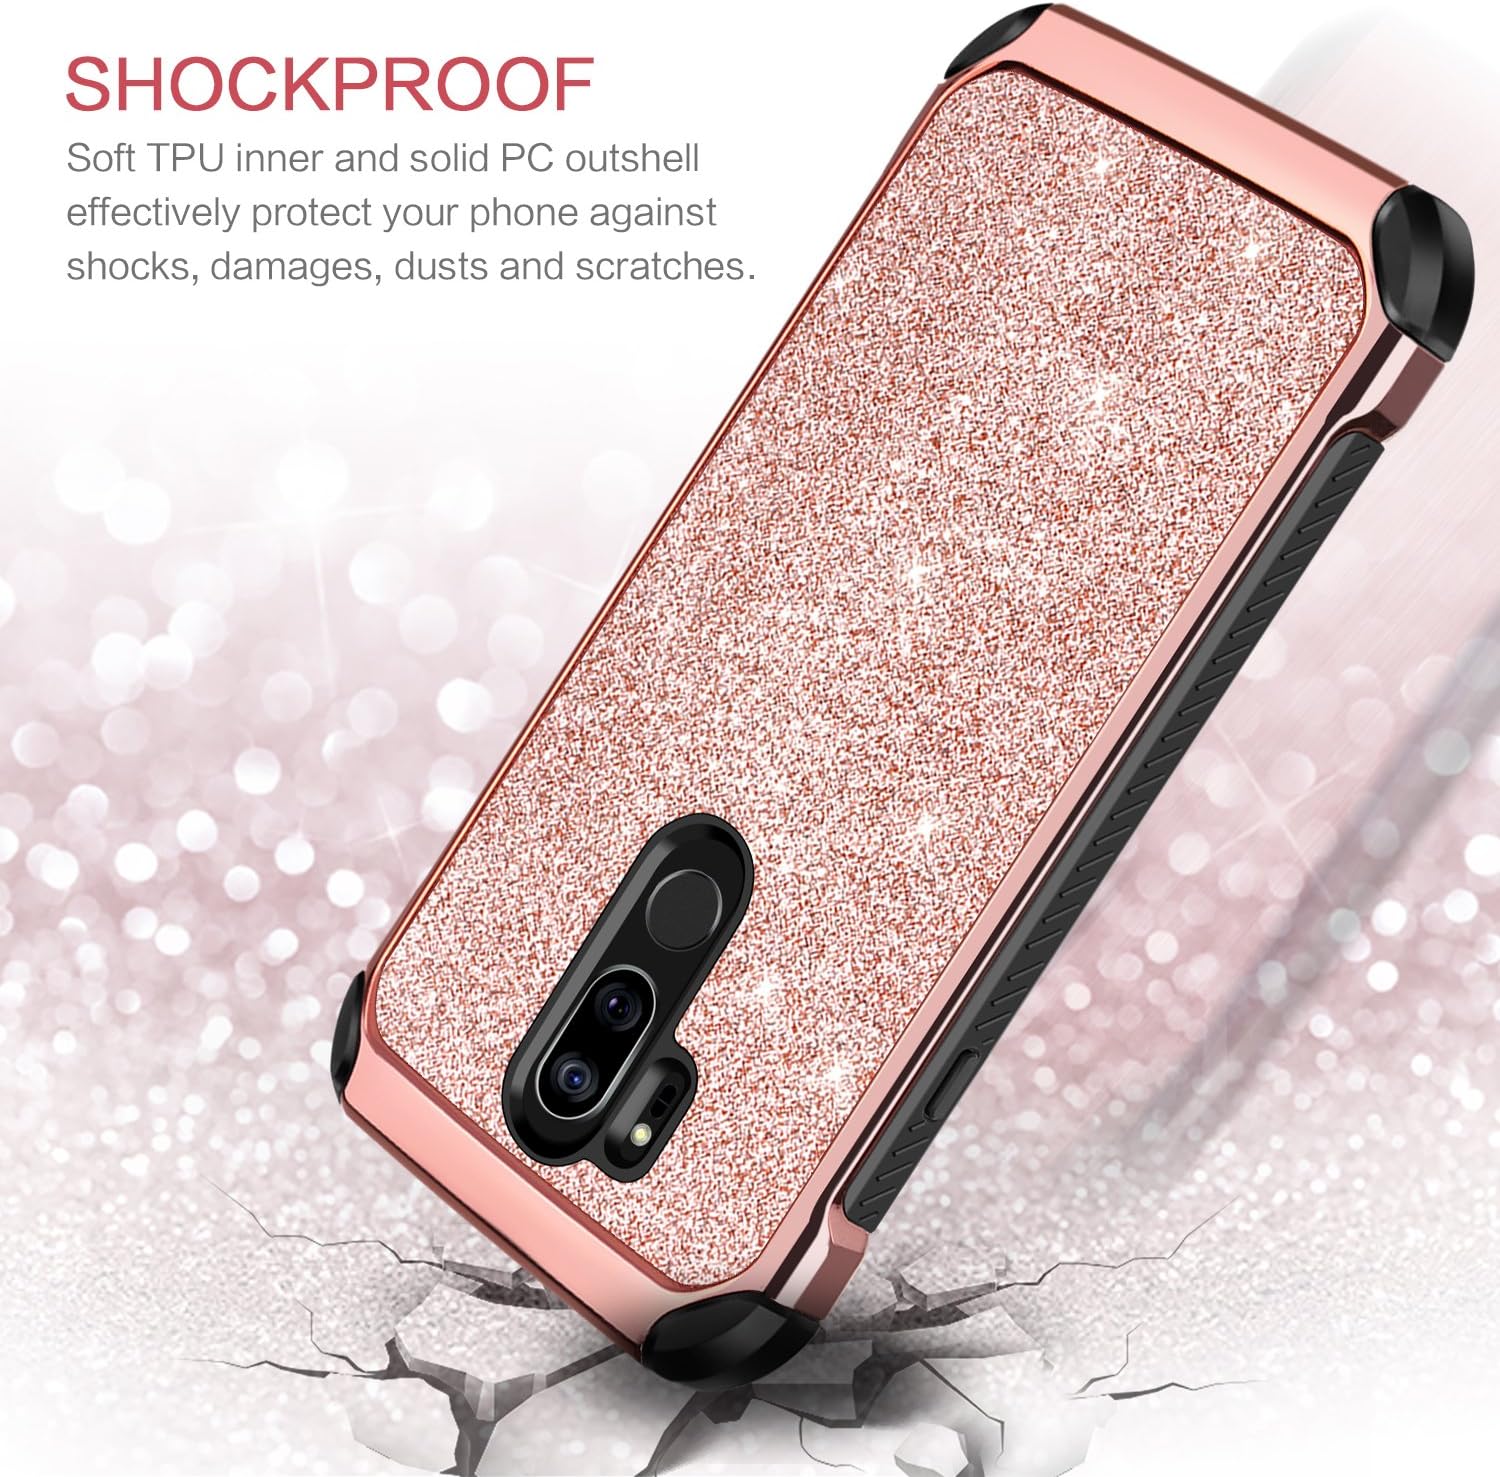 BENTOBEN Case for LG G7 ThinQ, Case for LG G7, Heavy Duty 2 in 1 Hybrid Hard PC Soft TPU Laminated Shiny Faux Leather Chrome Shockproof Cover Protective Phone Case for LG G7/LG G7 ThinQ, Rose Gold